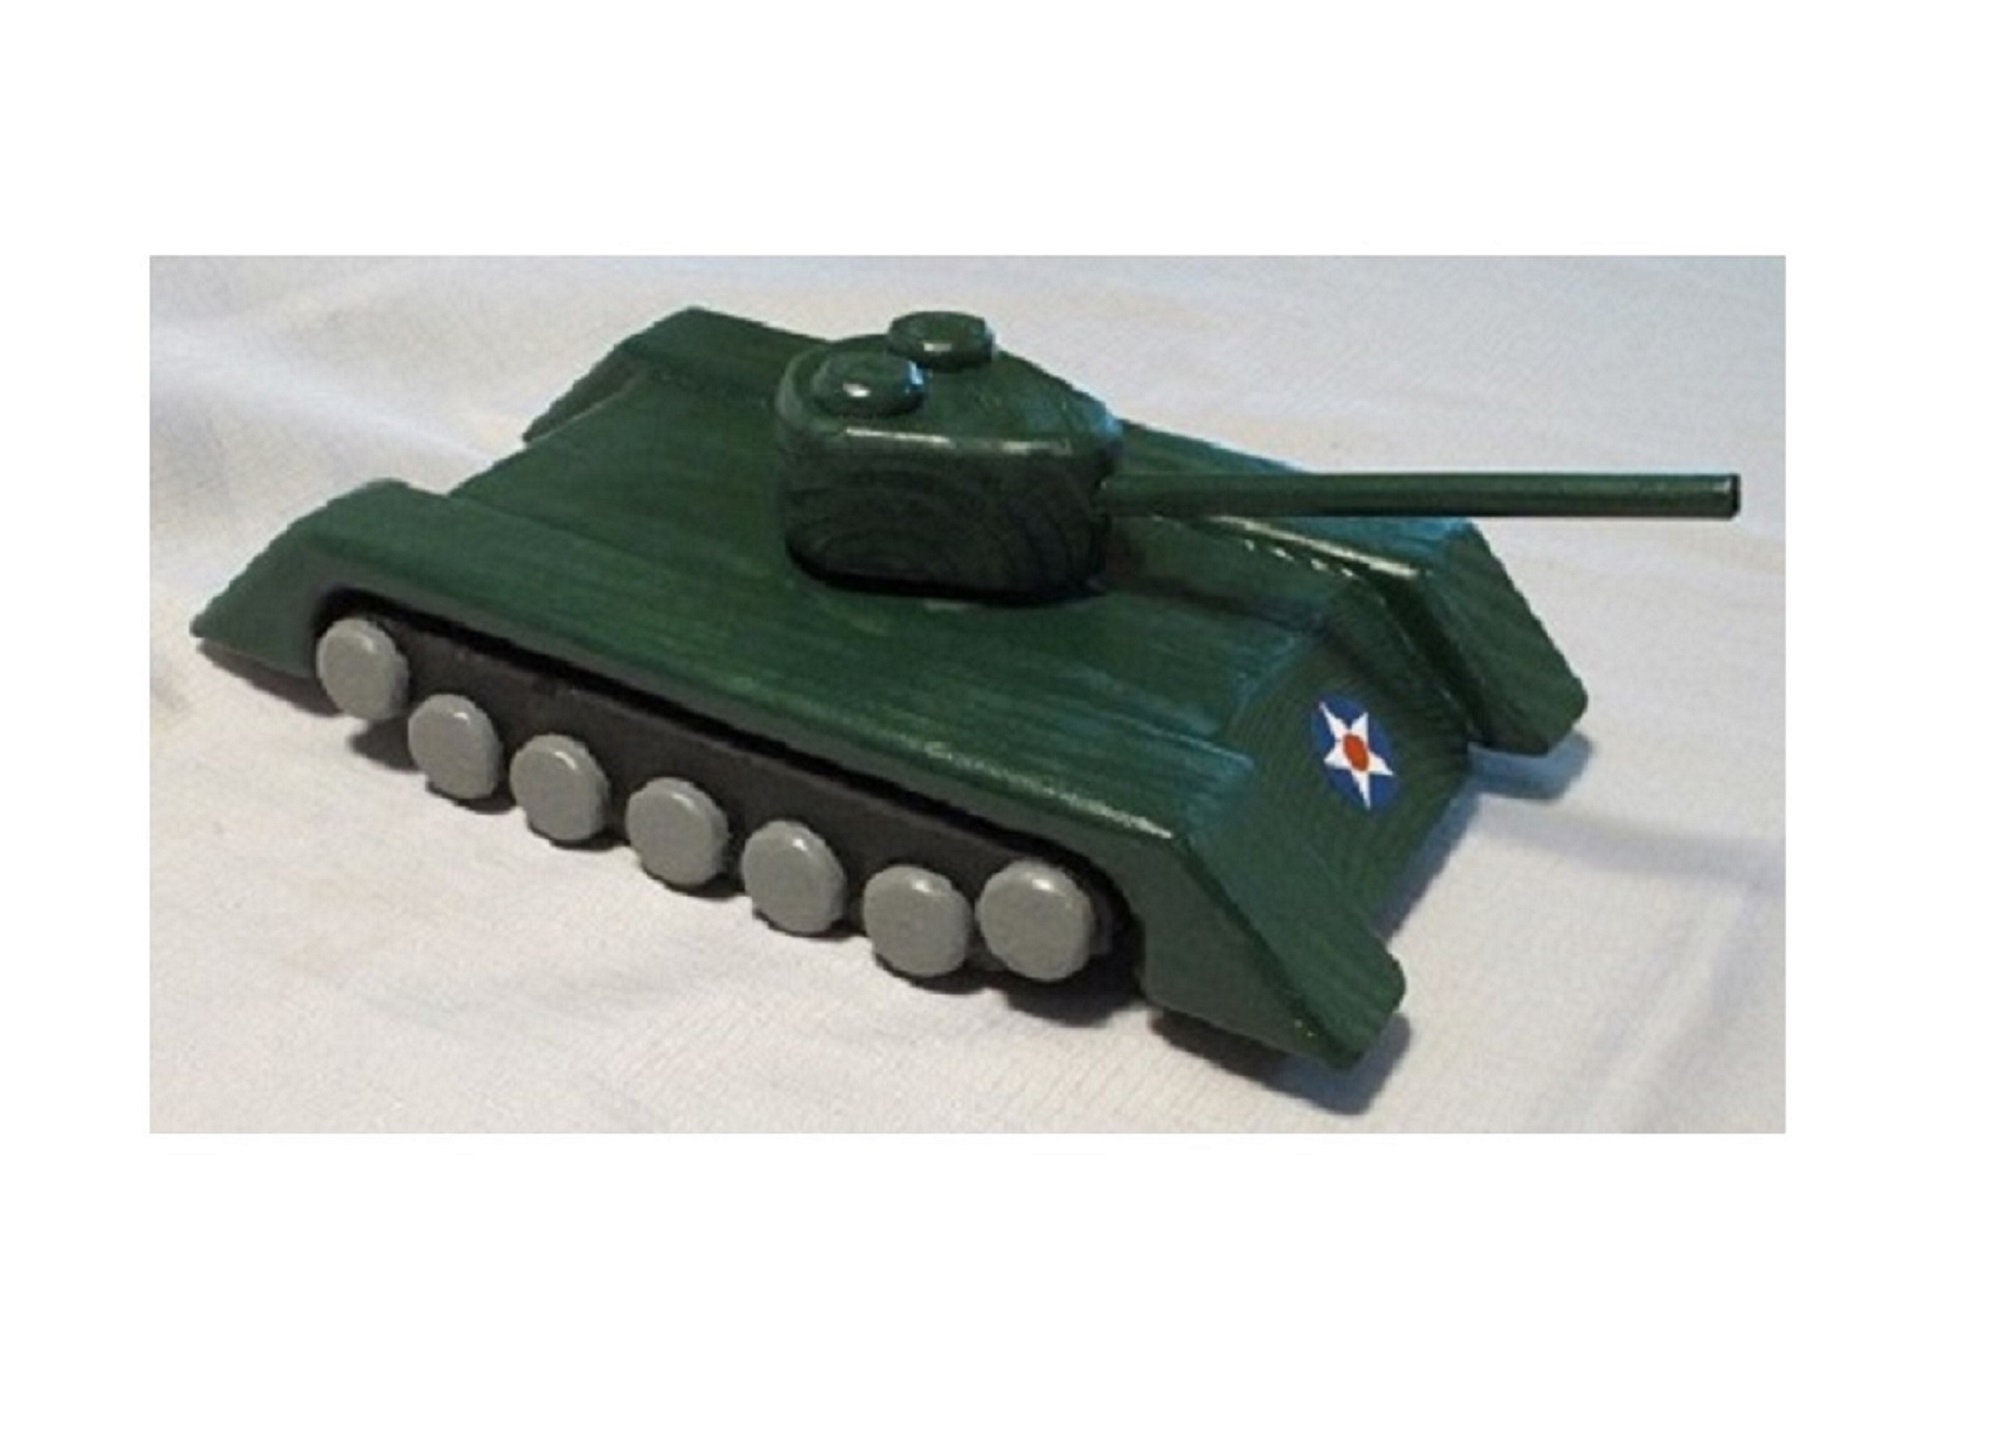 Build and Paint Your Own Model Kit Tank Army Armored Car Tank 3D Ply Wood  craft Kit 